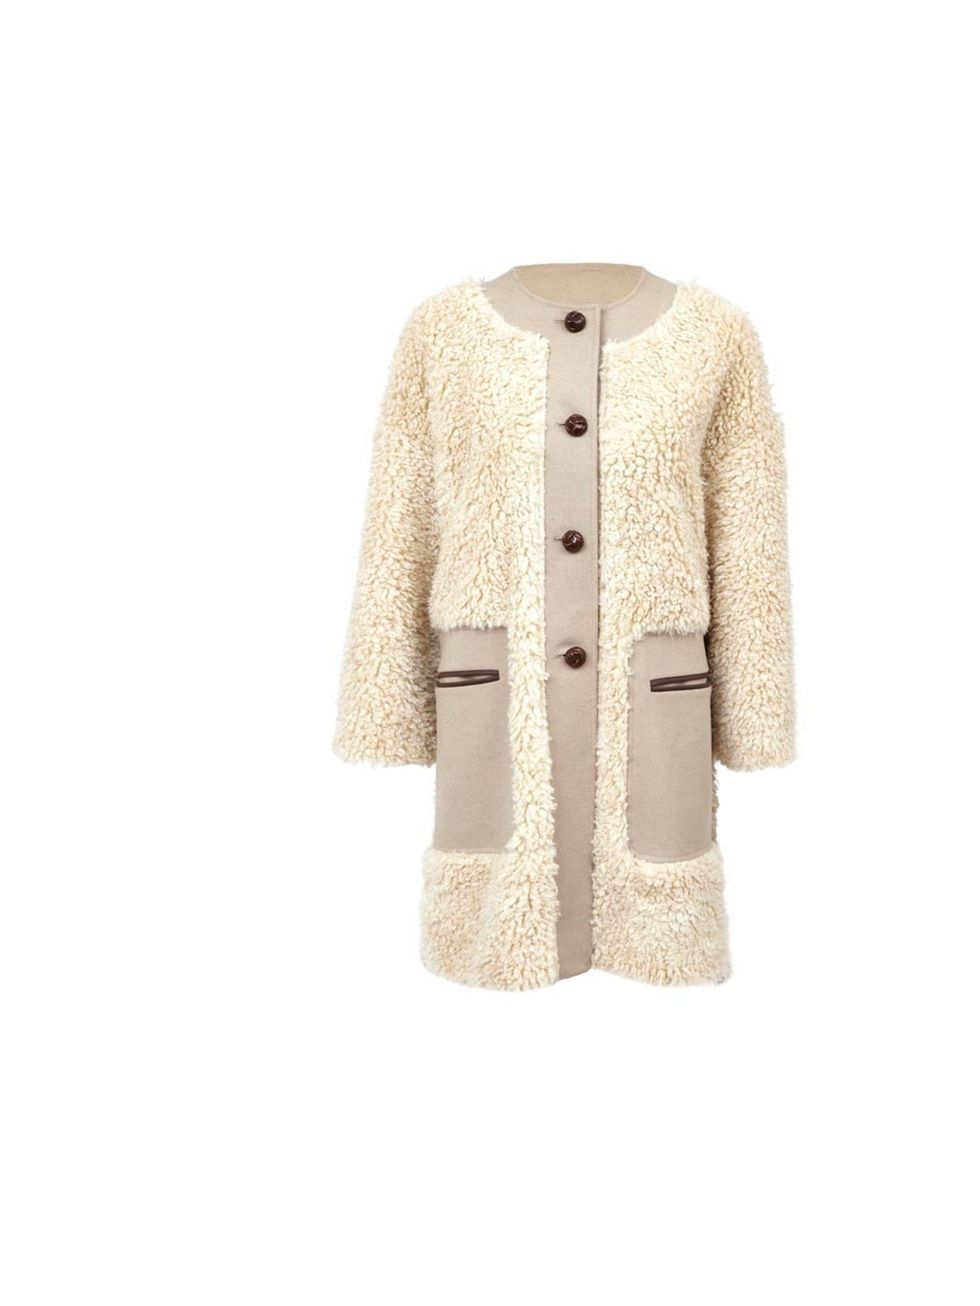 <p><a href="http://www.asos.com/?hrd=1">Asos coat</a>, was £95, now £47</p><p>For exclusive sale tips and additional discount codes <a href="https://itunes.apple.com/gb/app/elle-magazine-uk/id469353635?mt=8&amp;affId=1503186">buy your copy of January ELLE